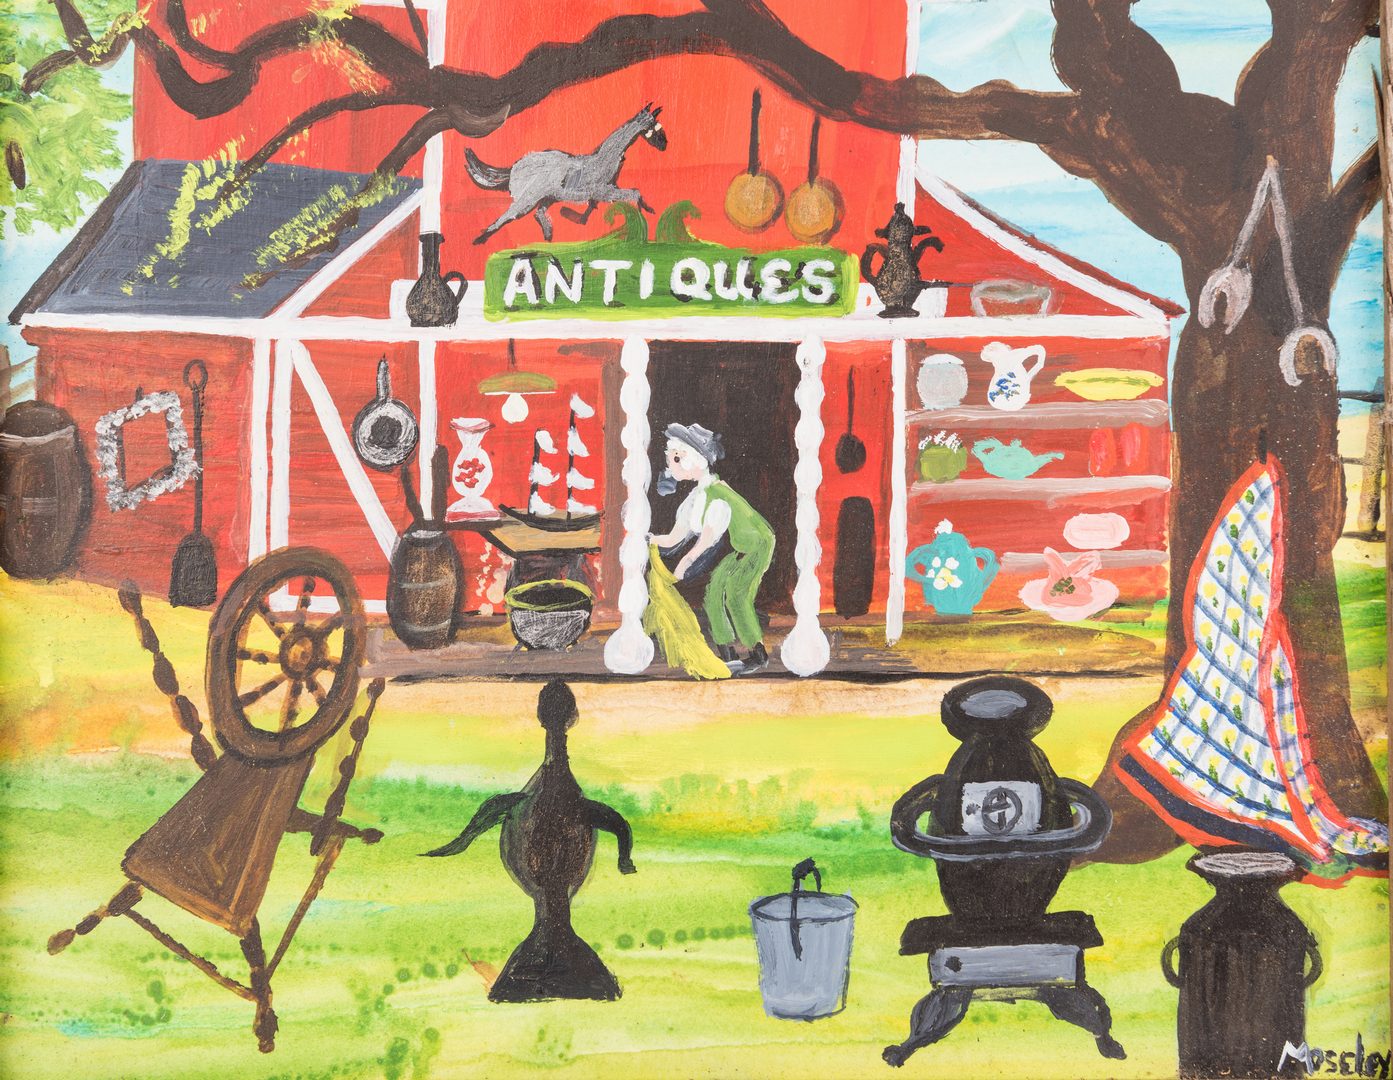 Lot 350: Alice Moseley painting, "Antiques"